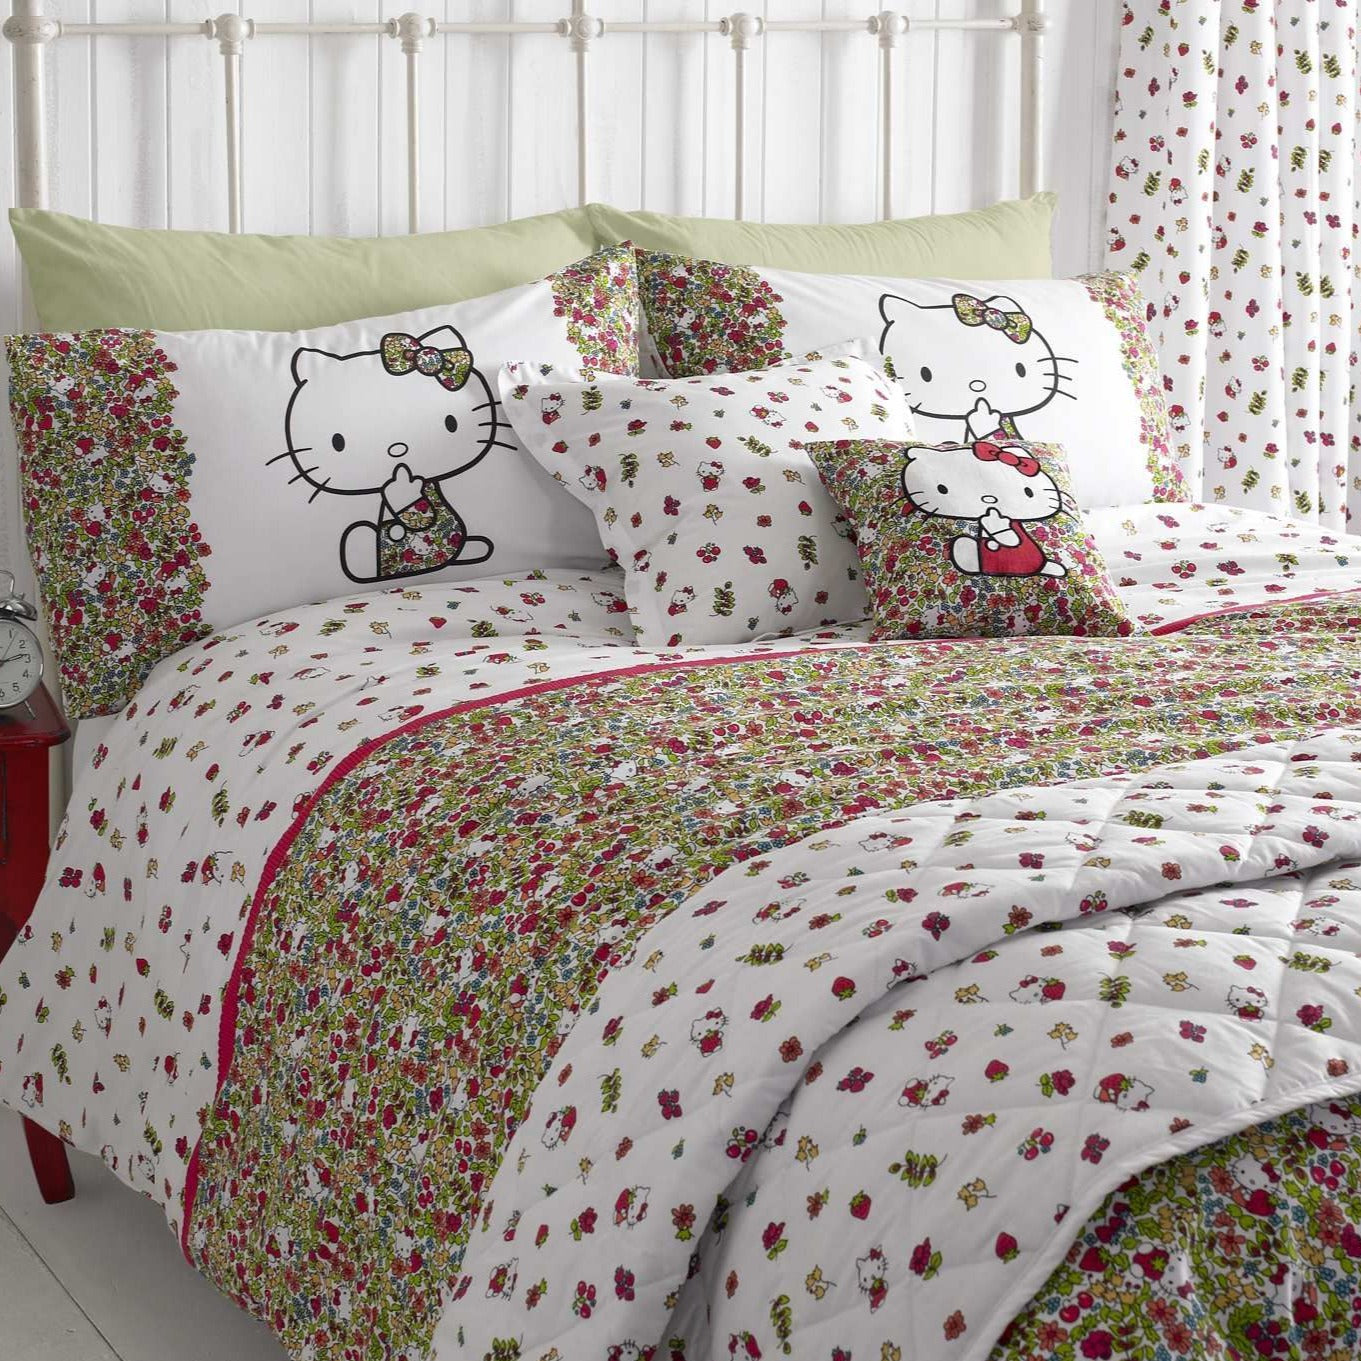 Strawberry Fields Duvet Set by Hello Kitty at Liberty